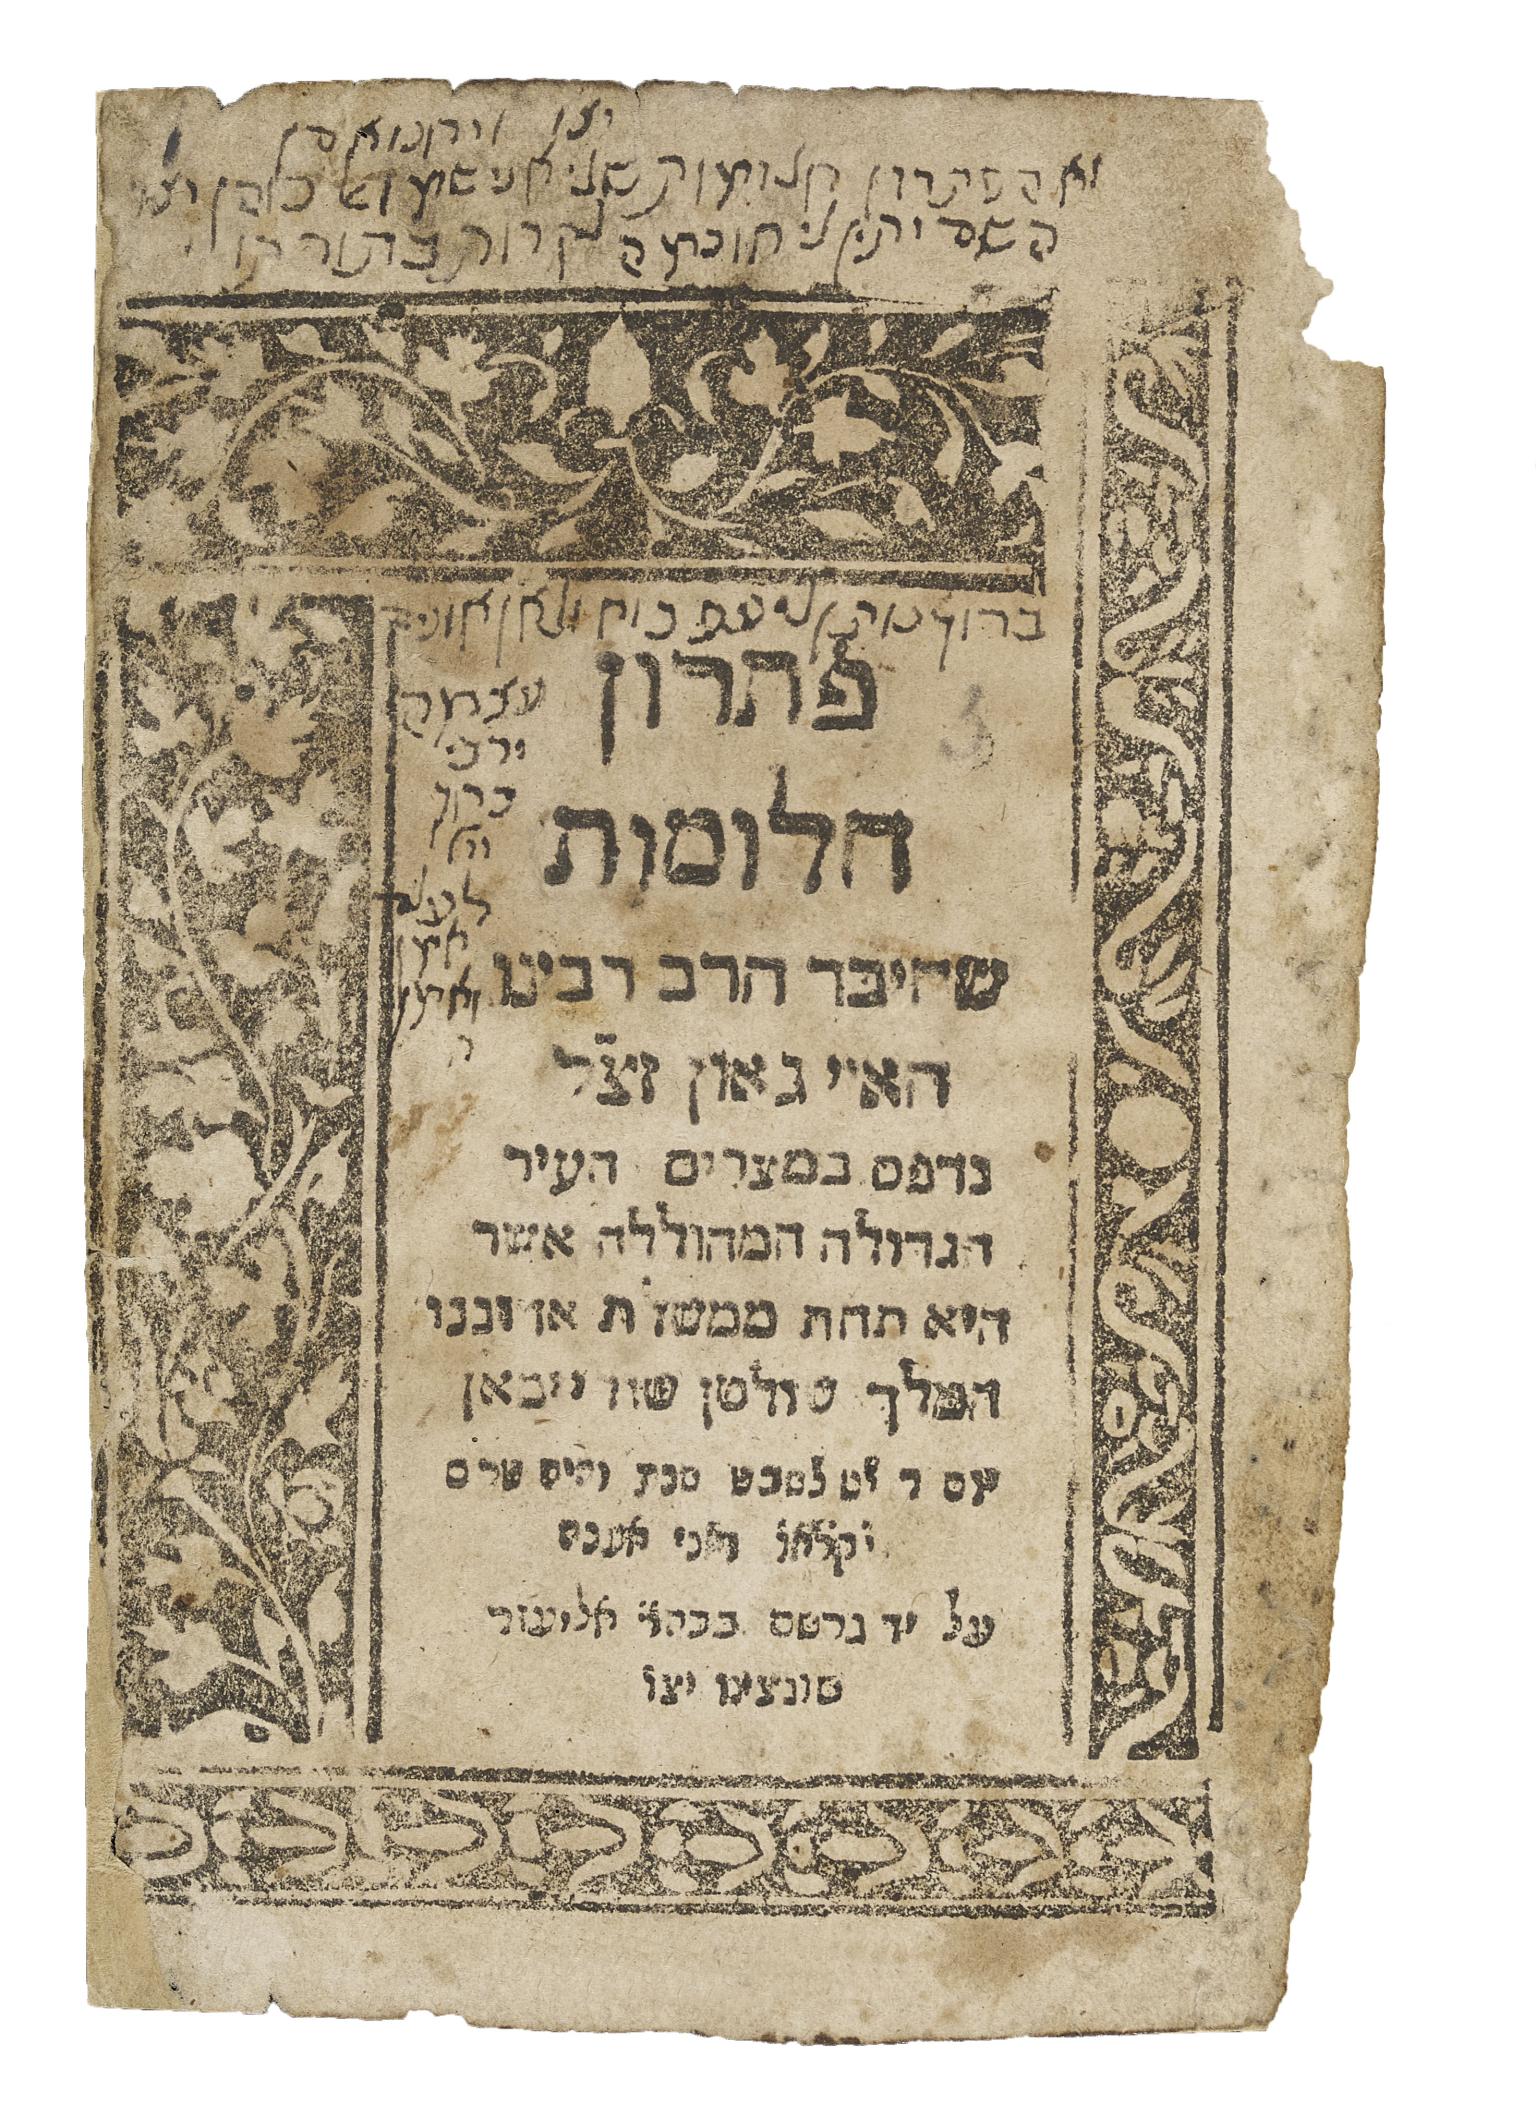 Printed page with Hebrew text and floral border around entire page.